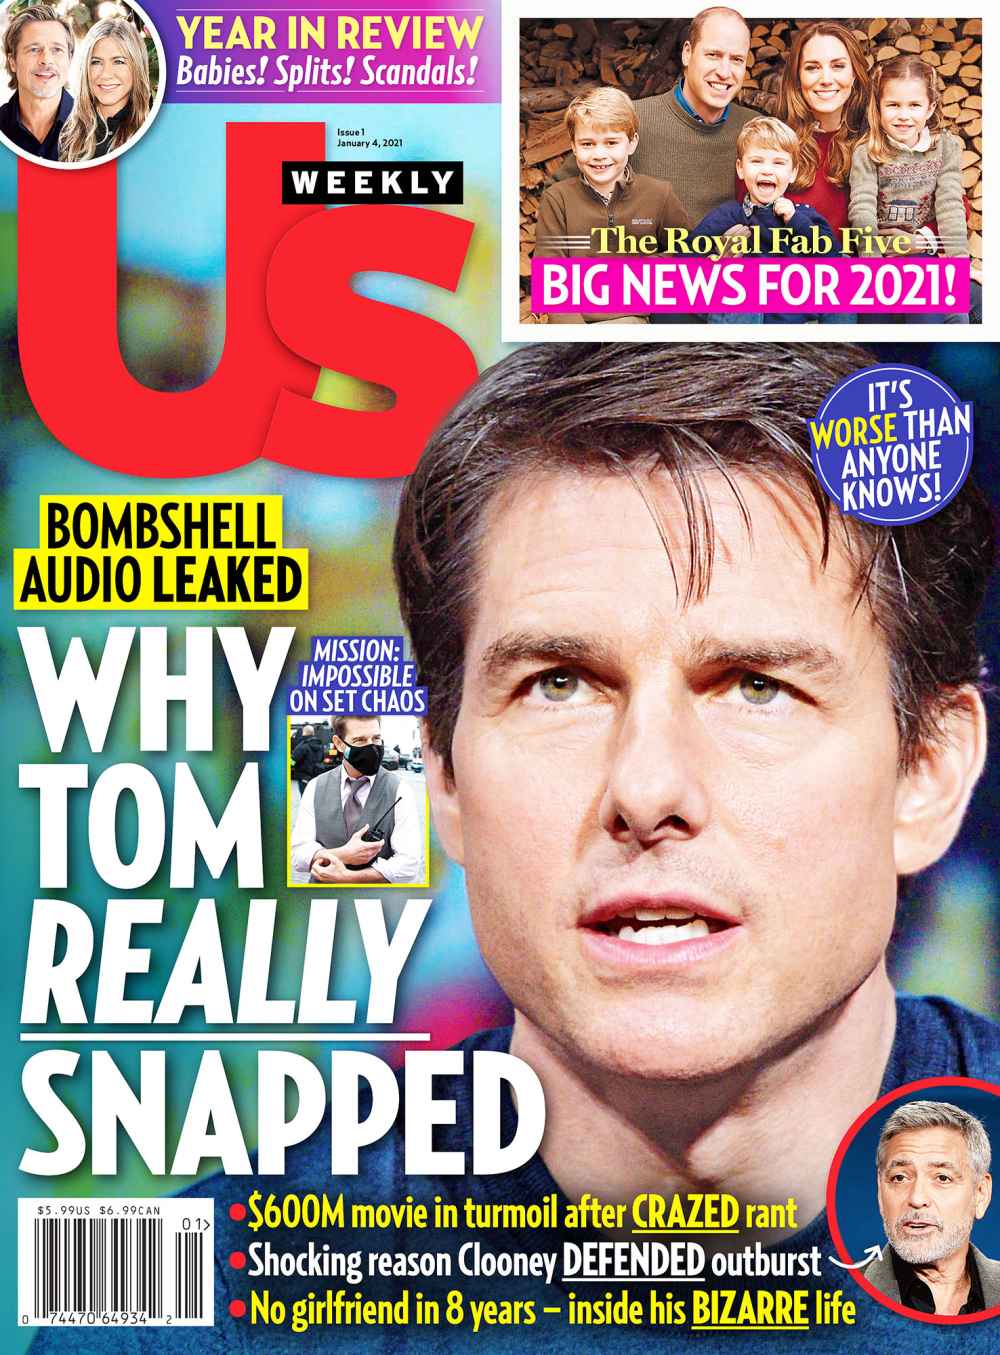 Inside Prince William, Duchess Kate’s Holiday Plans Us Weekly Issue 0121 Cover Tom Cruise Snaps